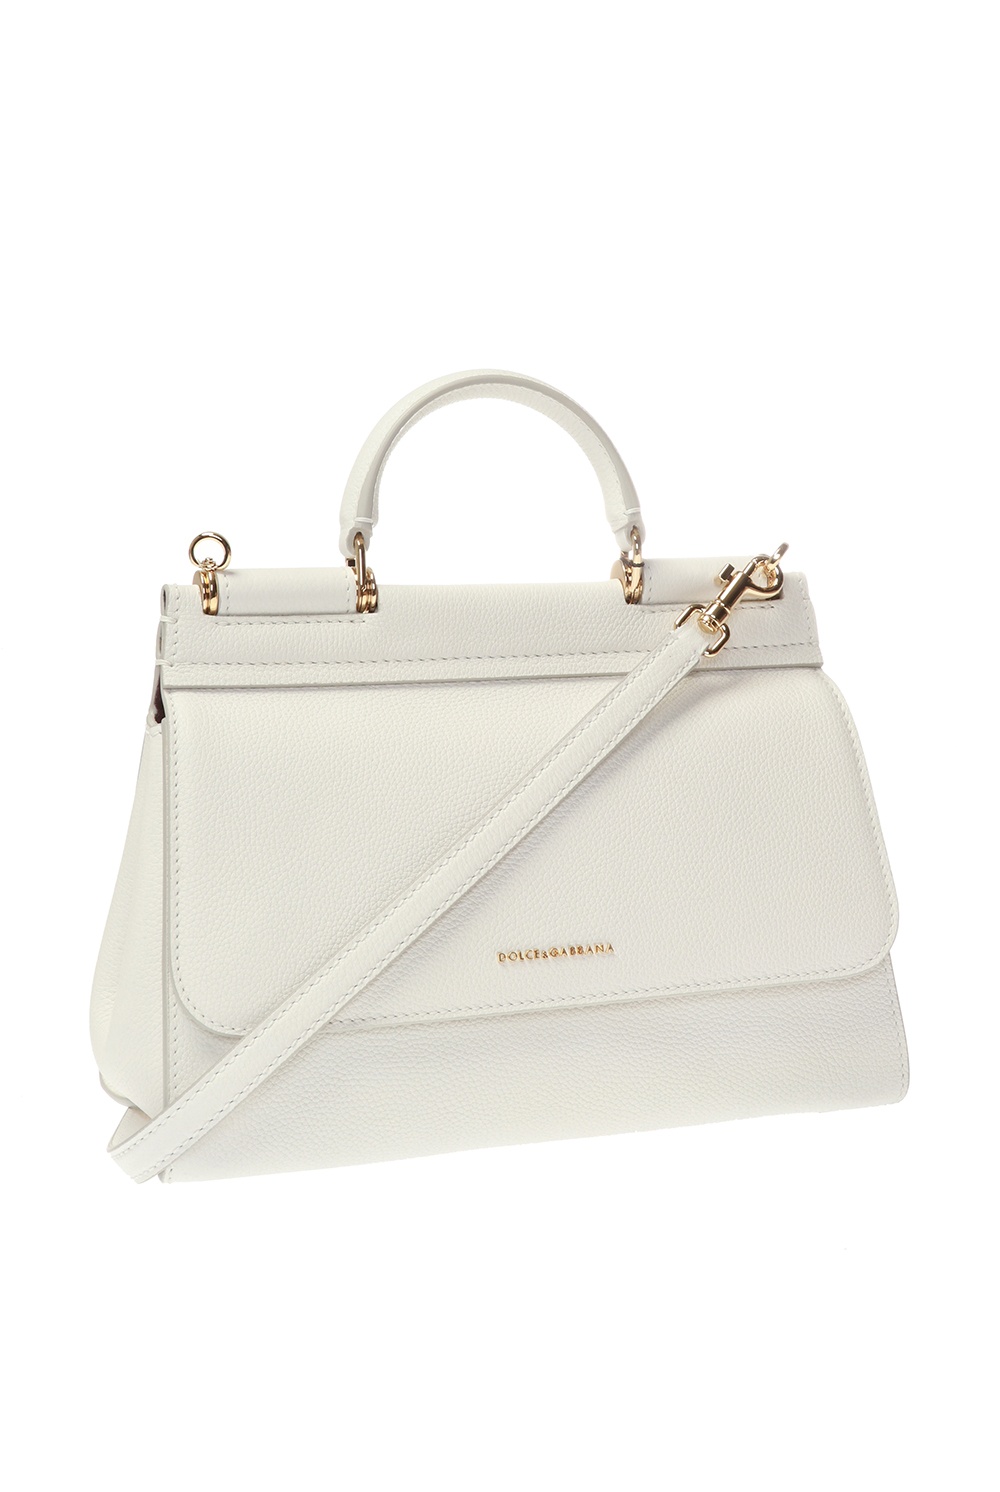 Dolce & Gabbana Sicily Soft Small Leather Tote Bag in White